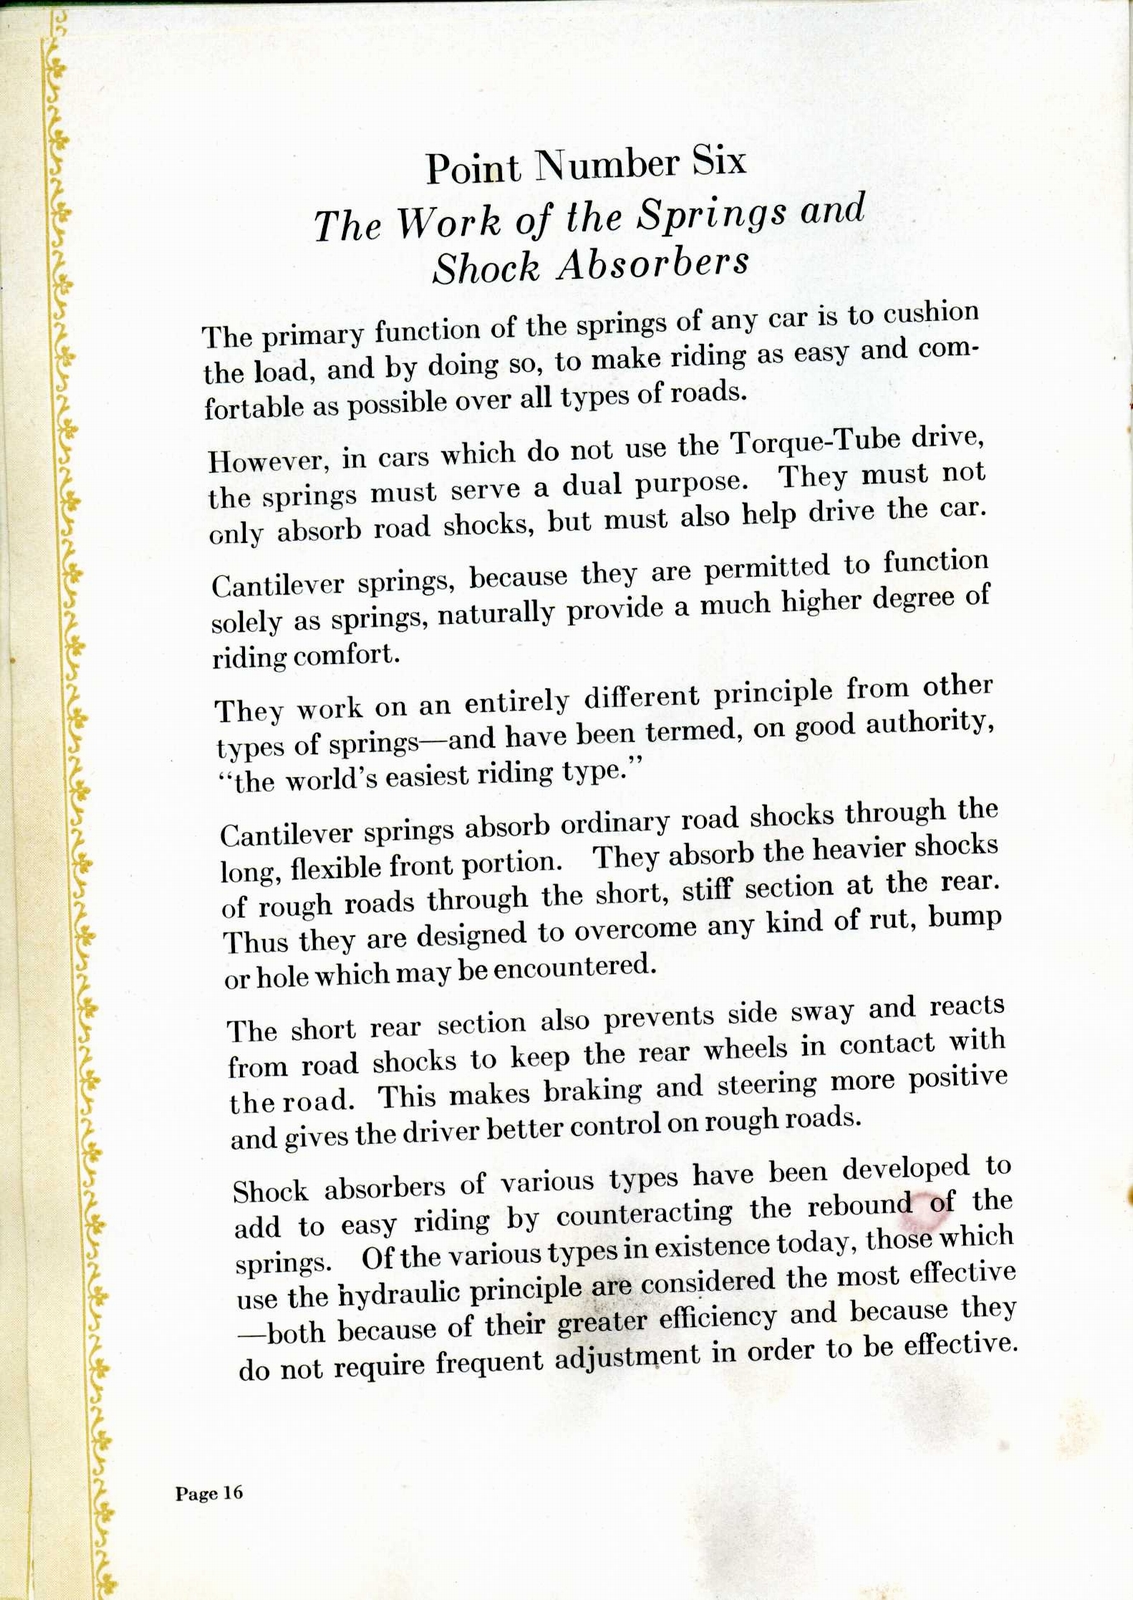 n_1928 Buick-How to Choose a Motor Car Wisely-16.jpg